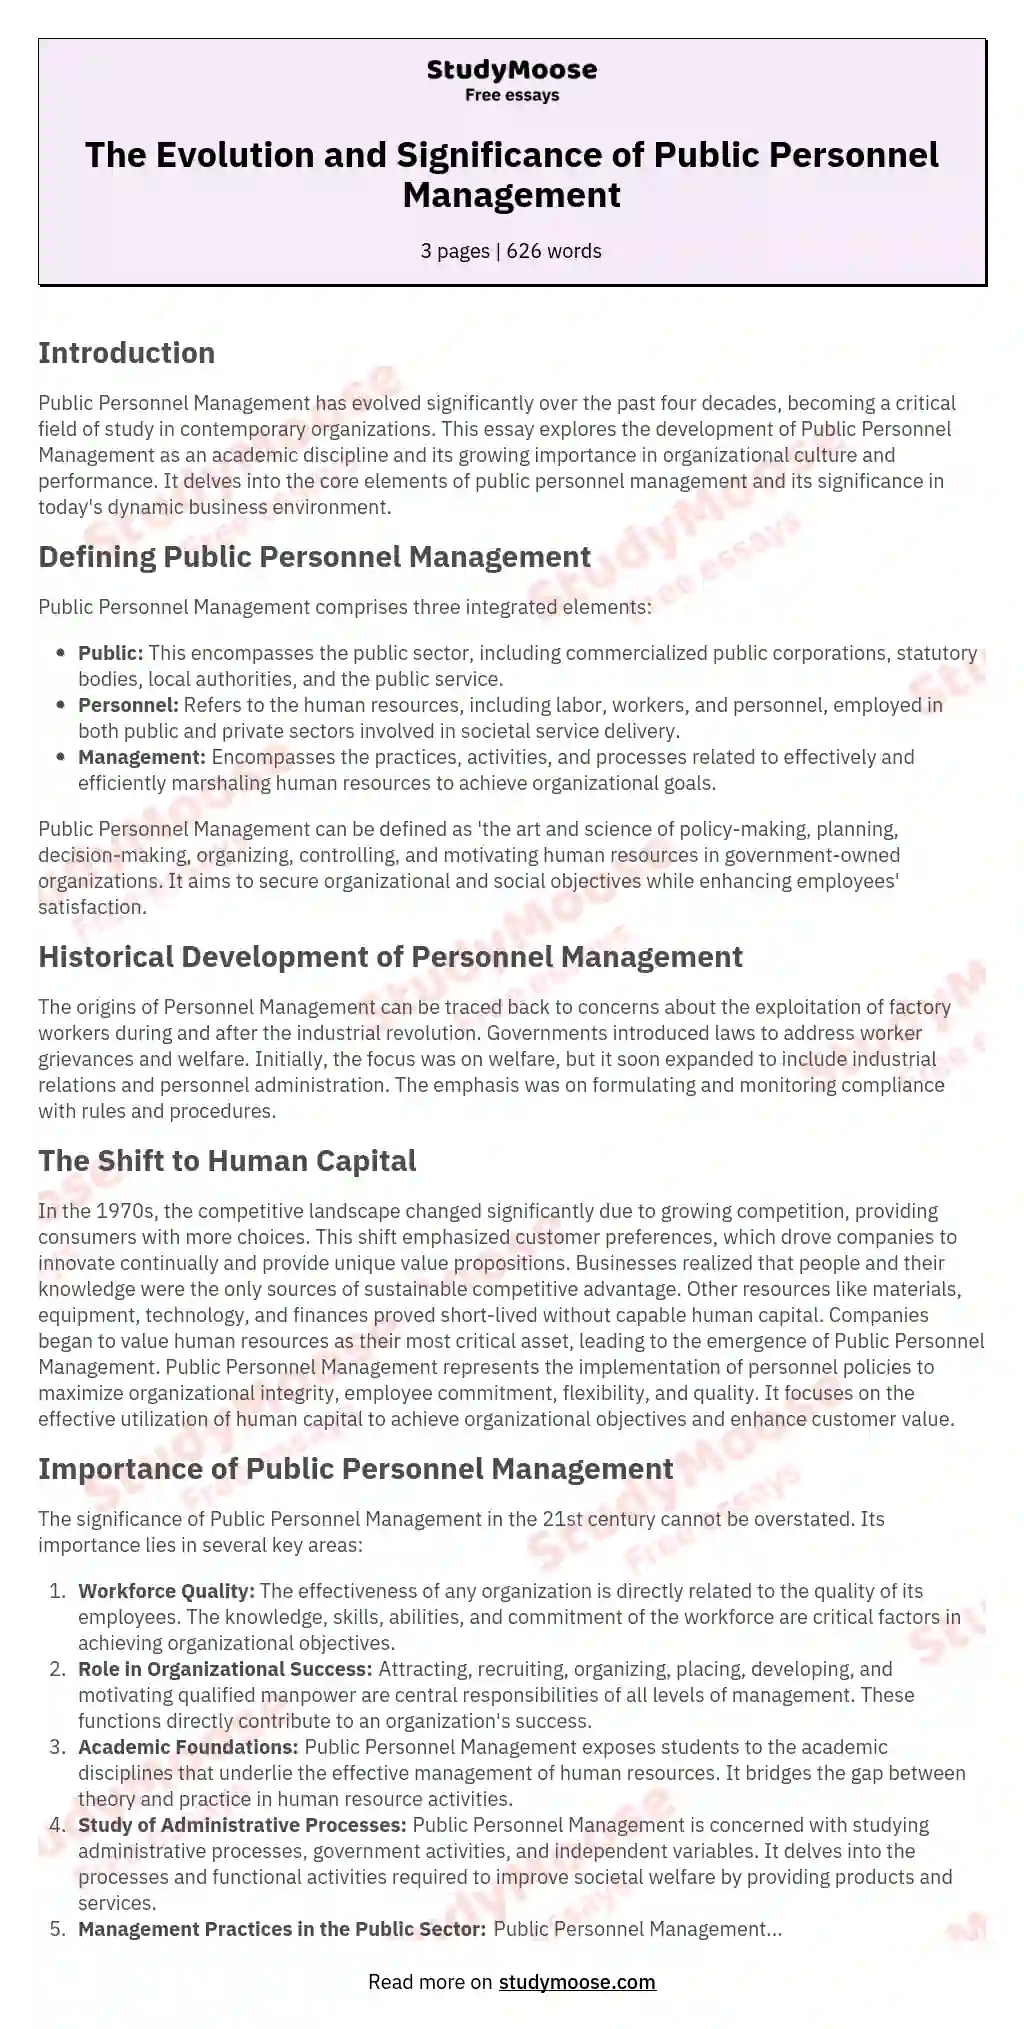 The Evolution and Significance of Public Personnel Management essay